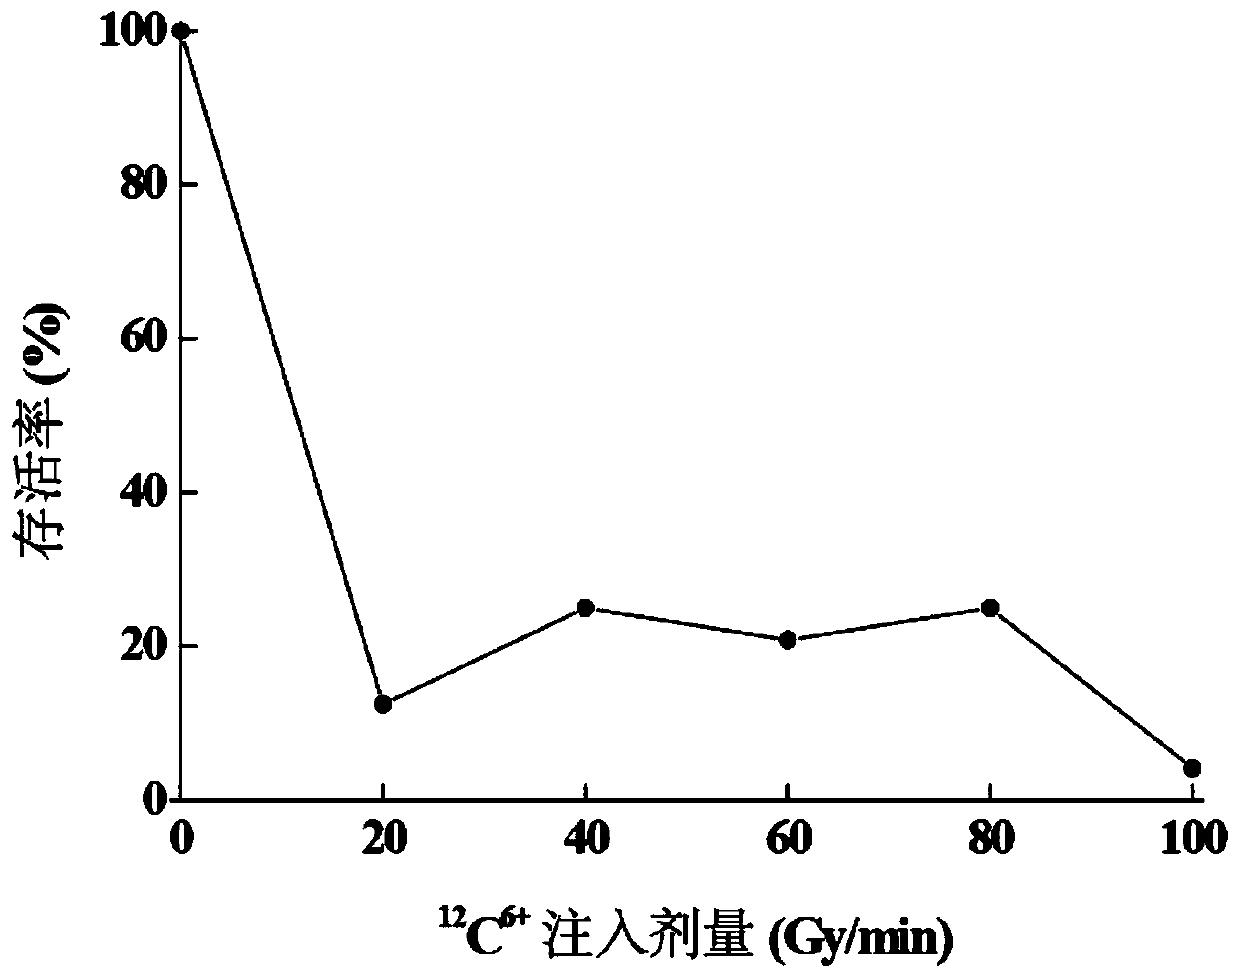 Cordyceps militaris mutant strain with high yield of cordycepin and its application